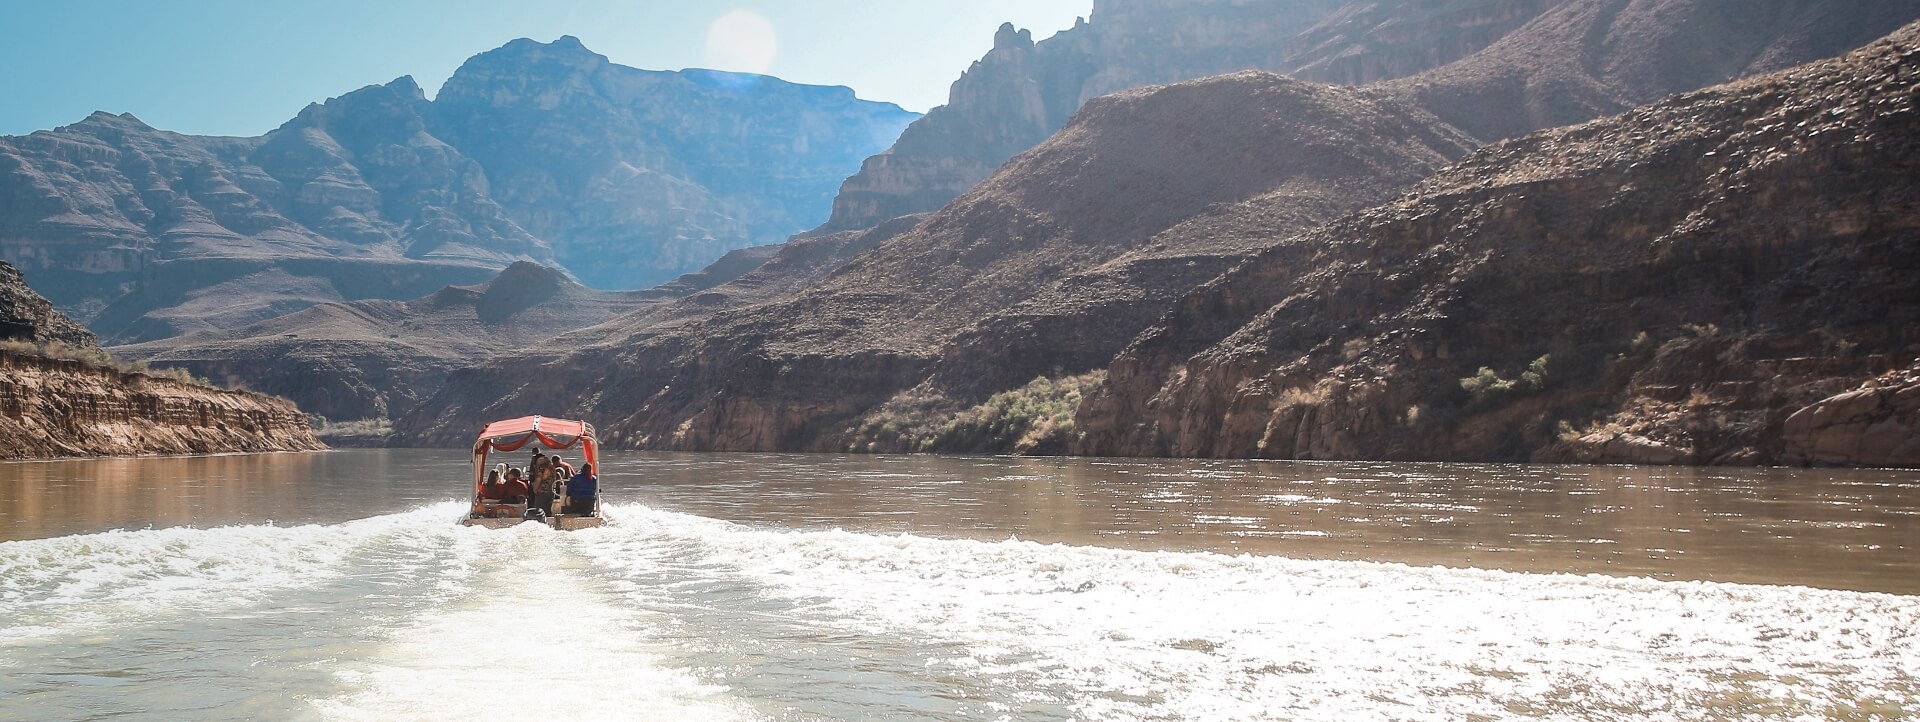 Rafting near the Grand Canyon